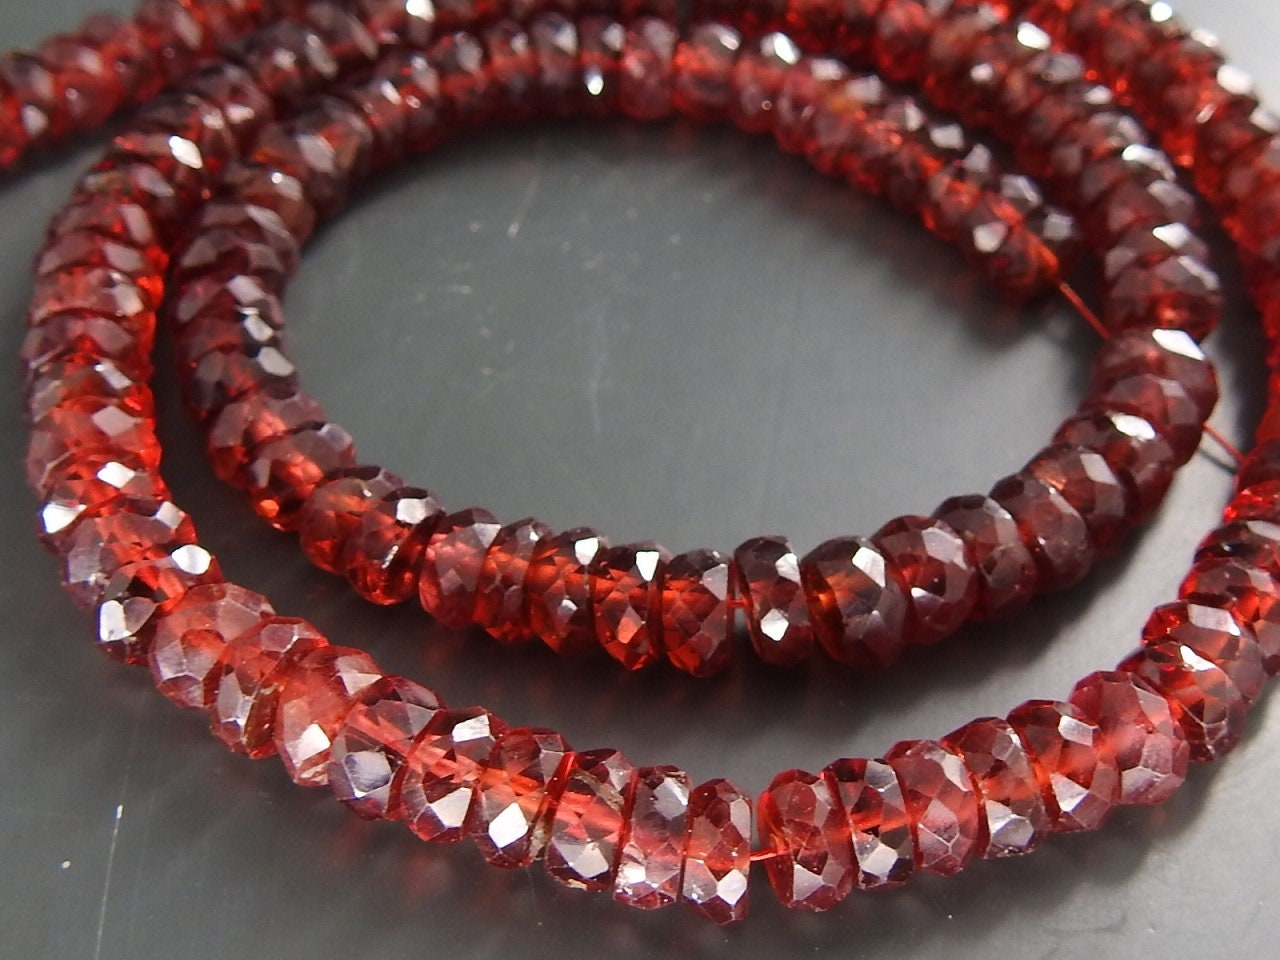 Mozambique Garnet Faceted Roundel Beads,Handmade,Loose Stone,Necklace,For Making Jewelry,16Inch Strand,Wholesaler,Supplies,100%NaturalBB(B6) | Save 33% - Rajasthan Living 18